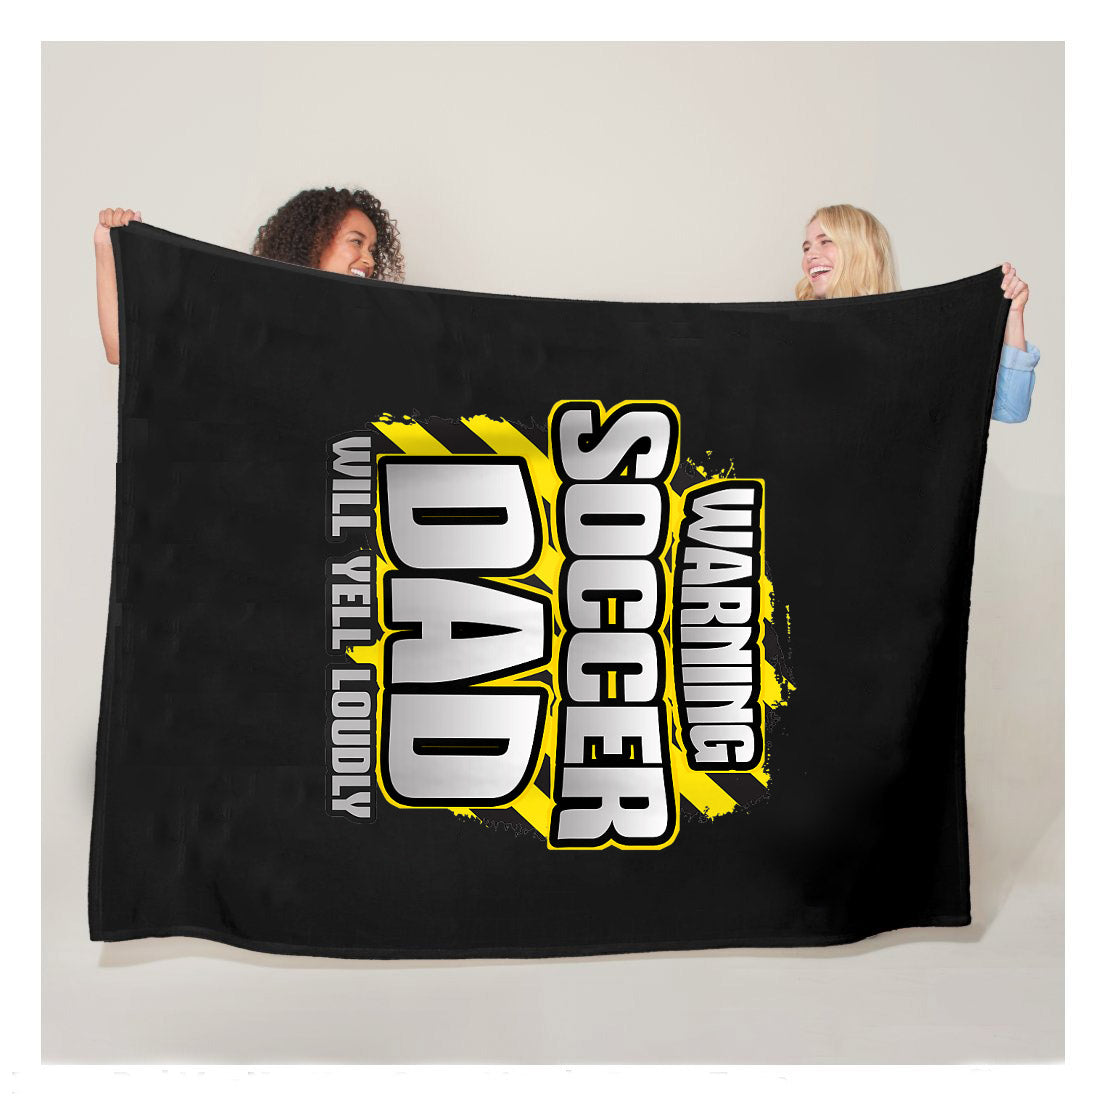 Funny Warning Soccer Dad Will Yell Loudly Sherpa Blanket,  Soccer Blankets, Soccer Gifts, Happy Fathers Day Gift Ideas For Dad